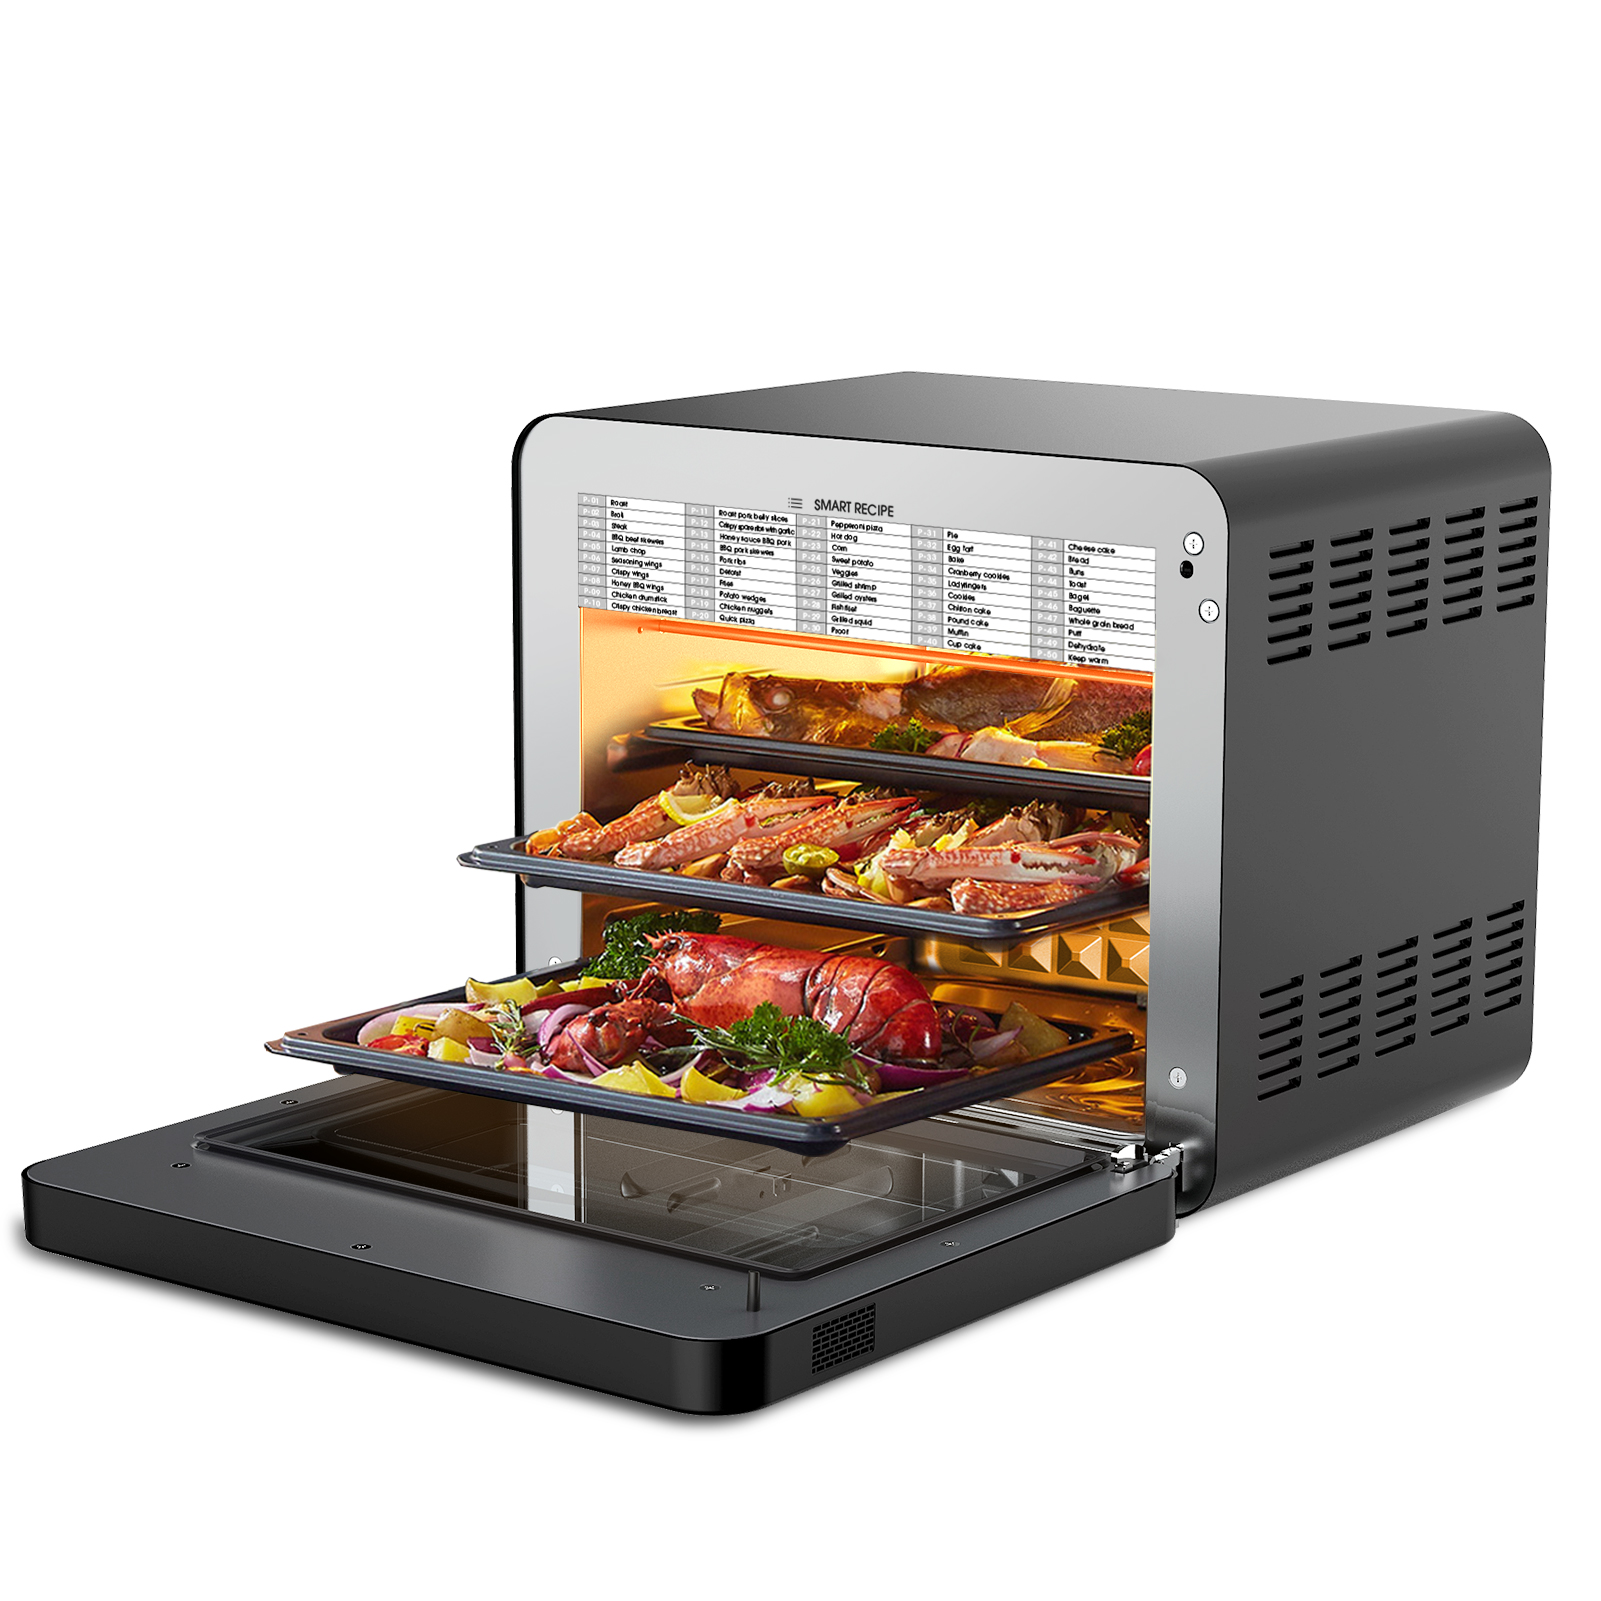 Kmowoo Geek Chef Steam Air Fryer Toast Oven Combo , 26 QT Steam Convection Oven Countertop , 50 Cooking Presets, with 6 Slice Toast, 12inch Pizza, Black Stainless Steel - image 3 of 9